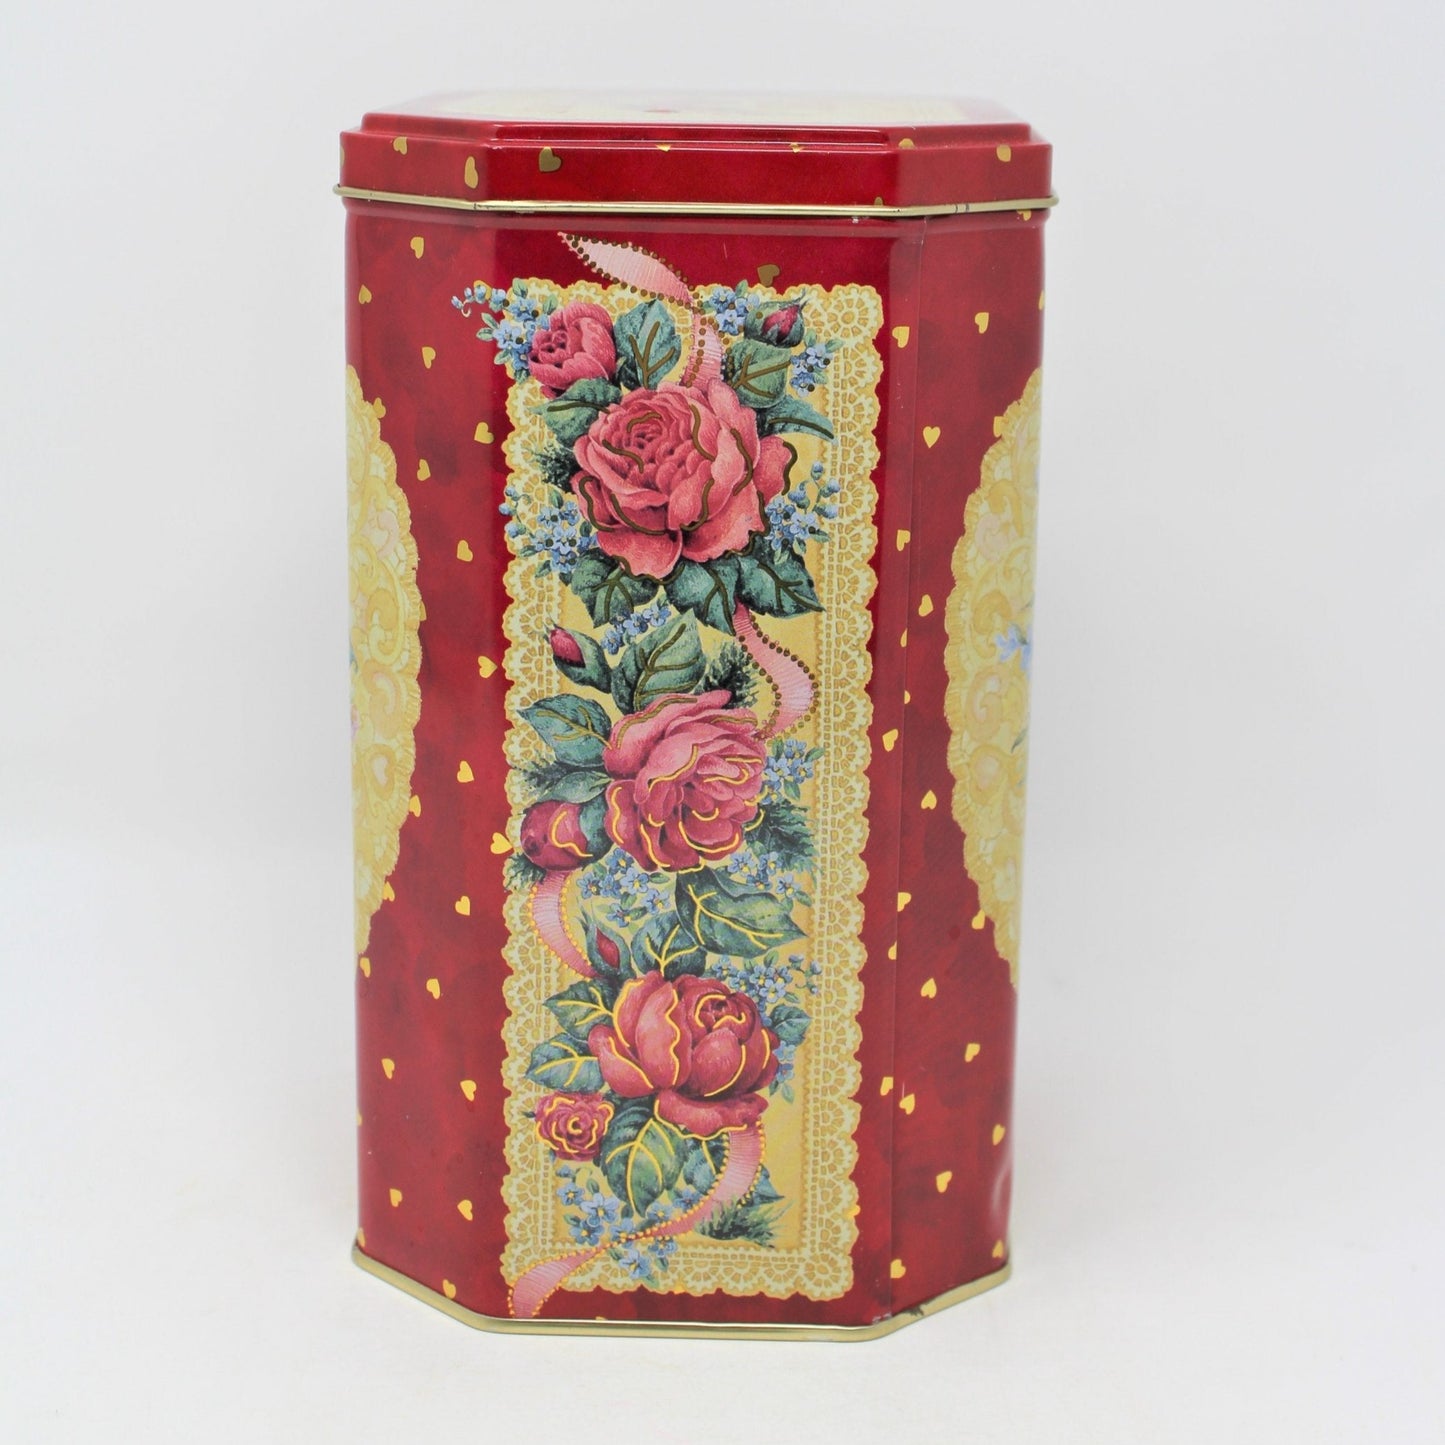 Gift Tin / Cookie Tin, Roses are Forever Heart Tin, England Vintage